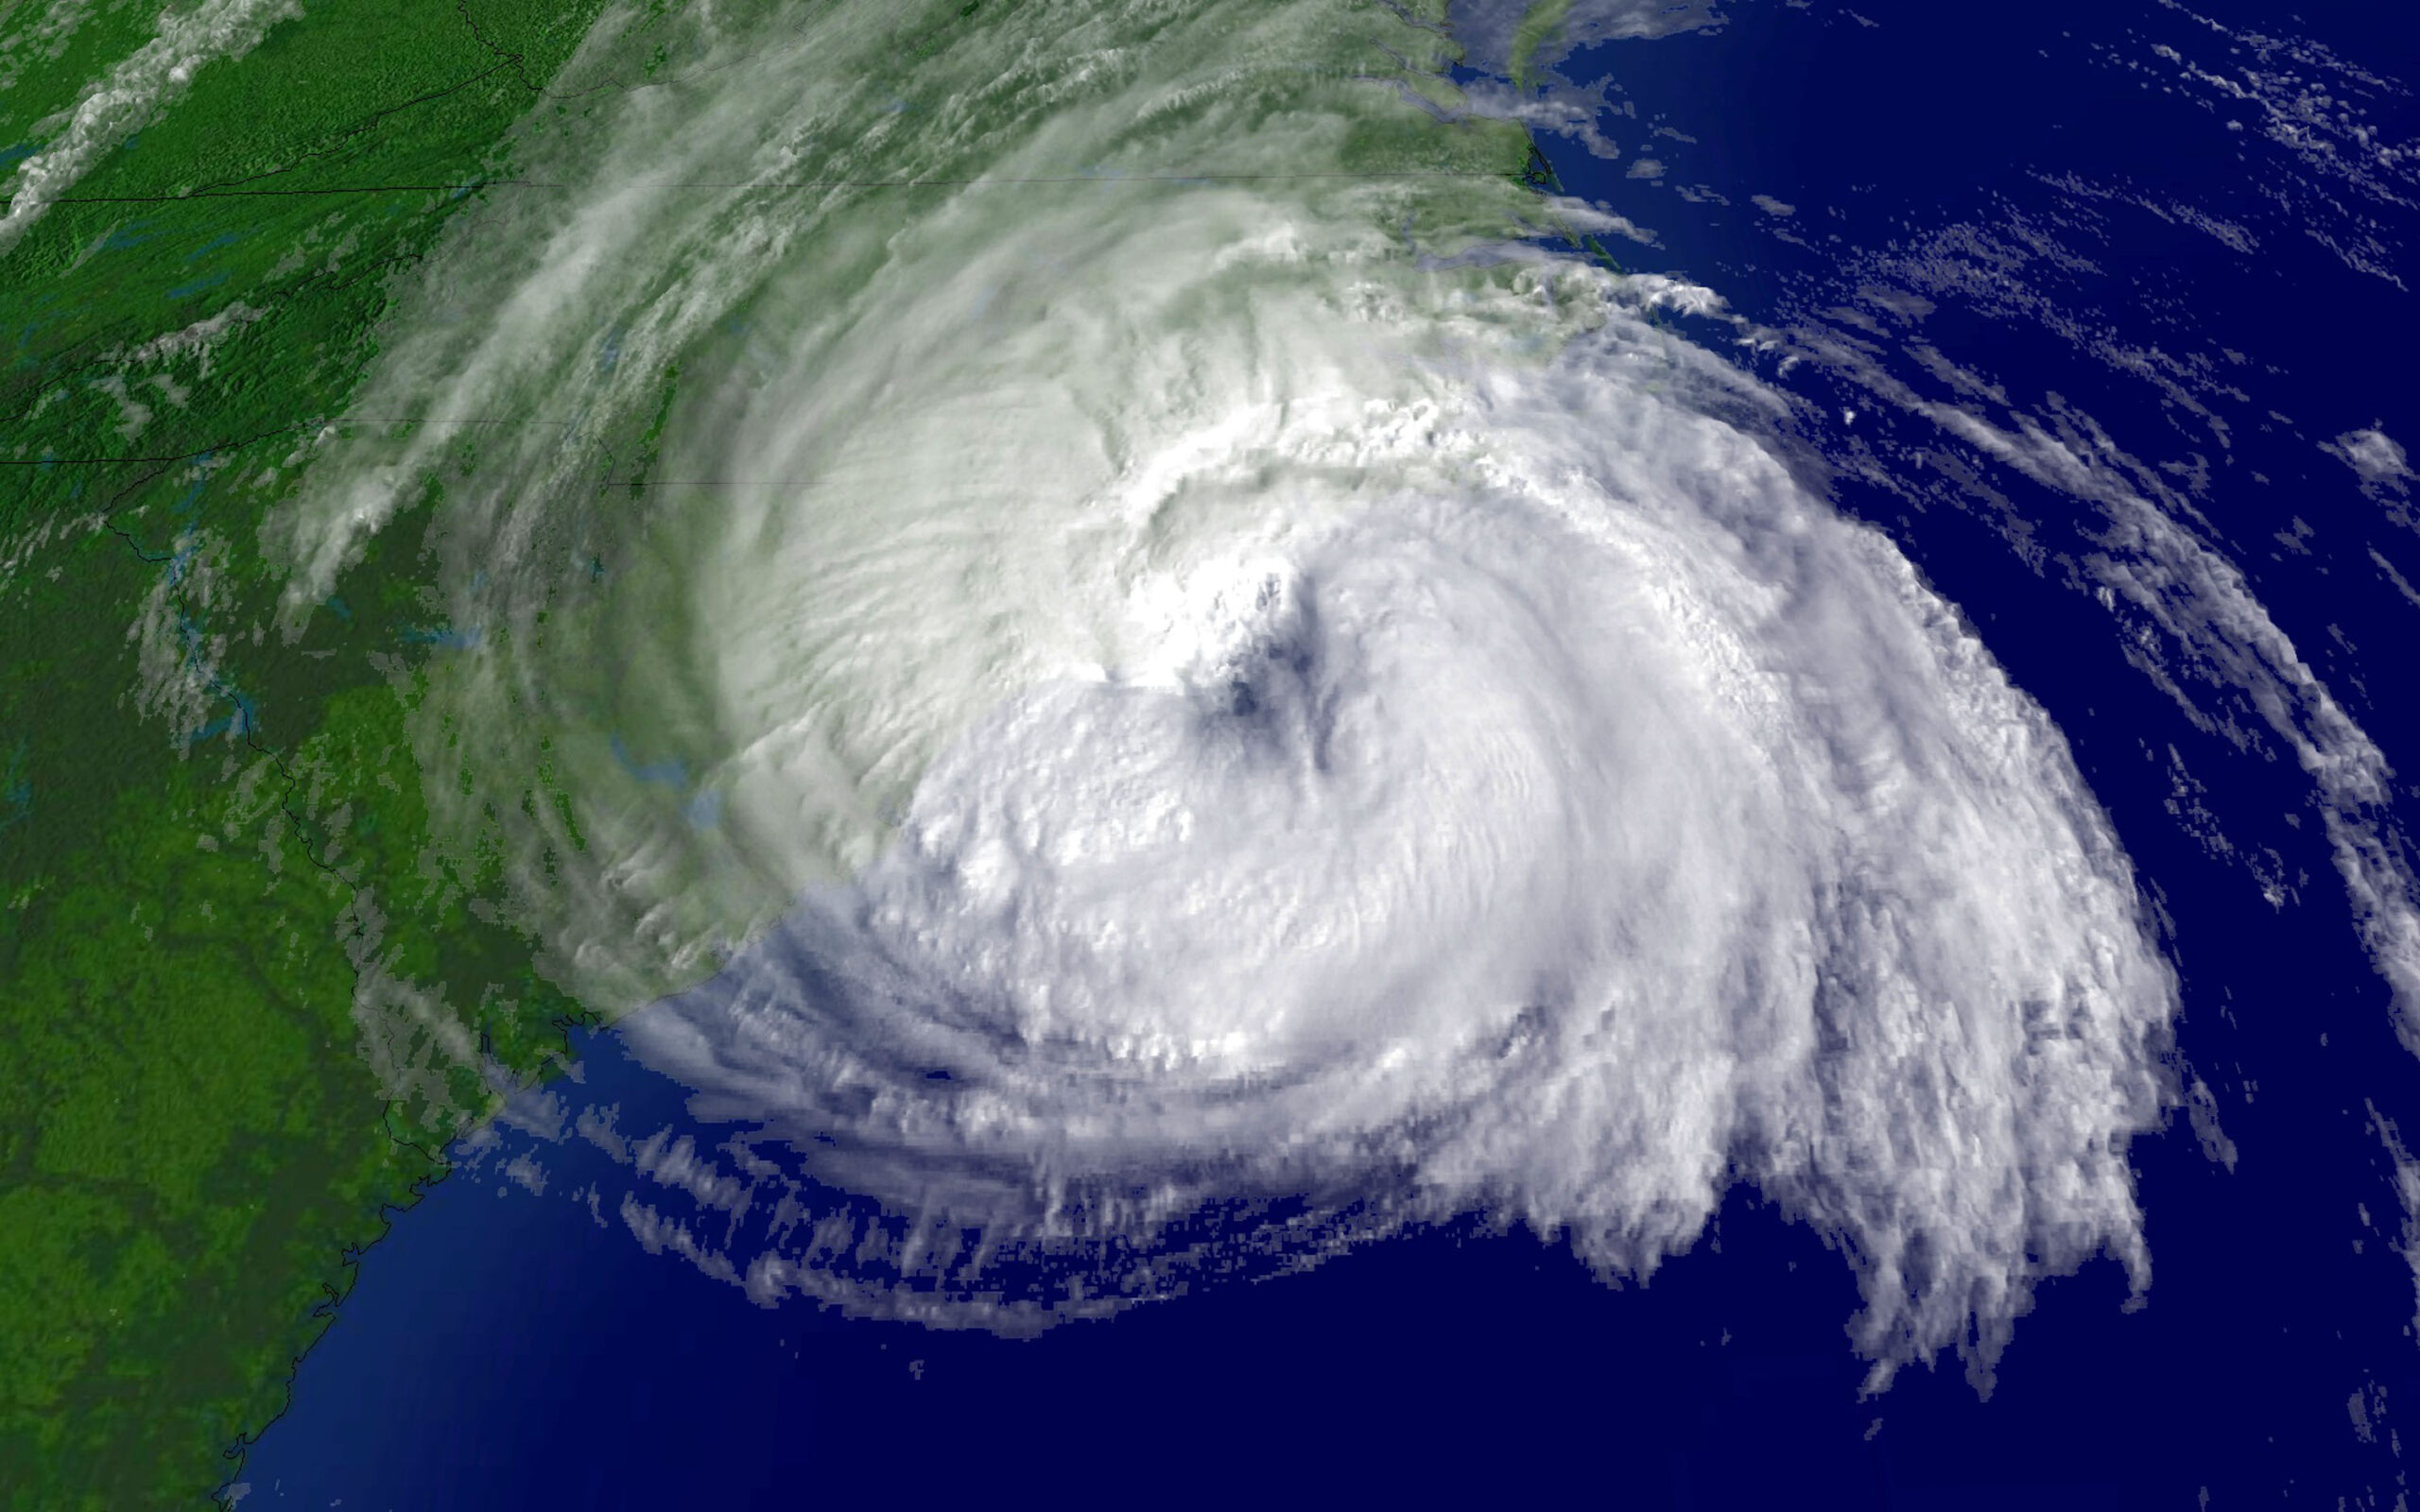 NOAA expects near-normal Atlantic hurricane season with ‘a lot of uncertainty’